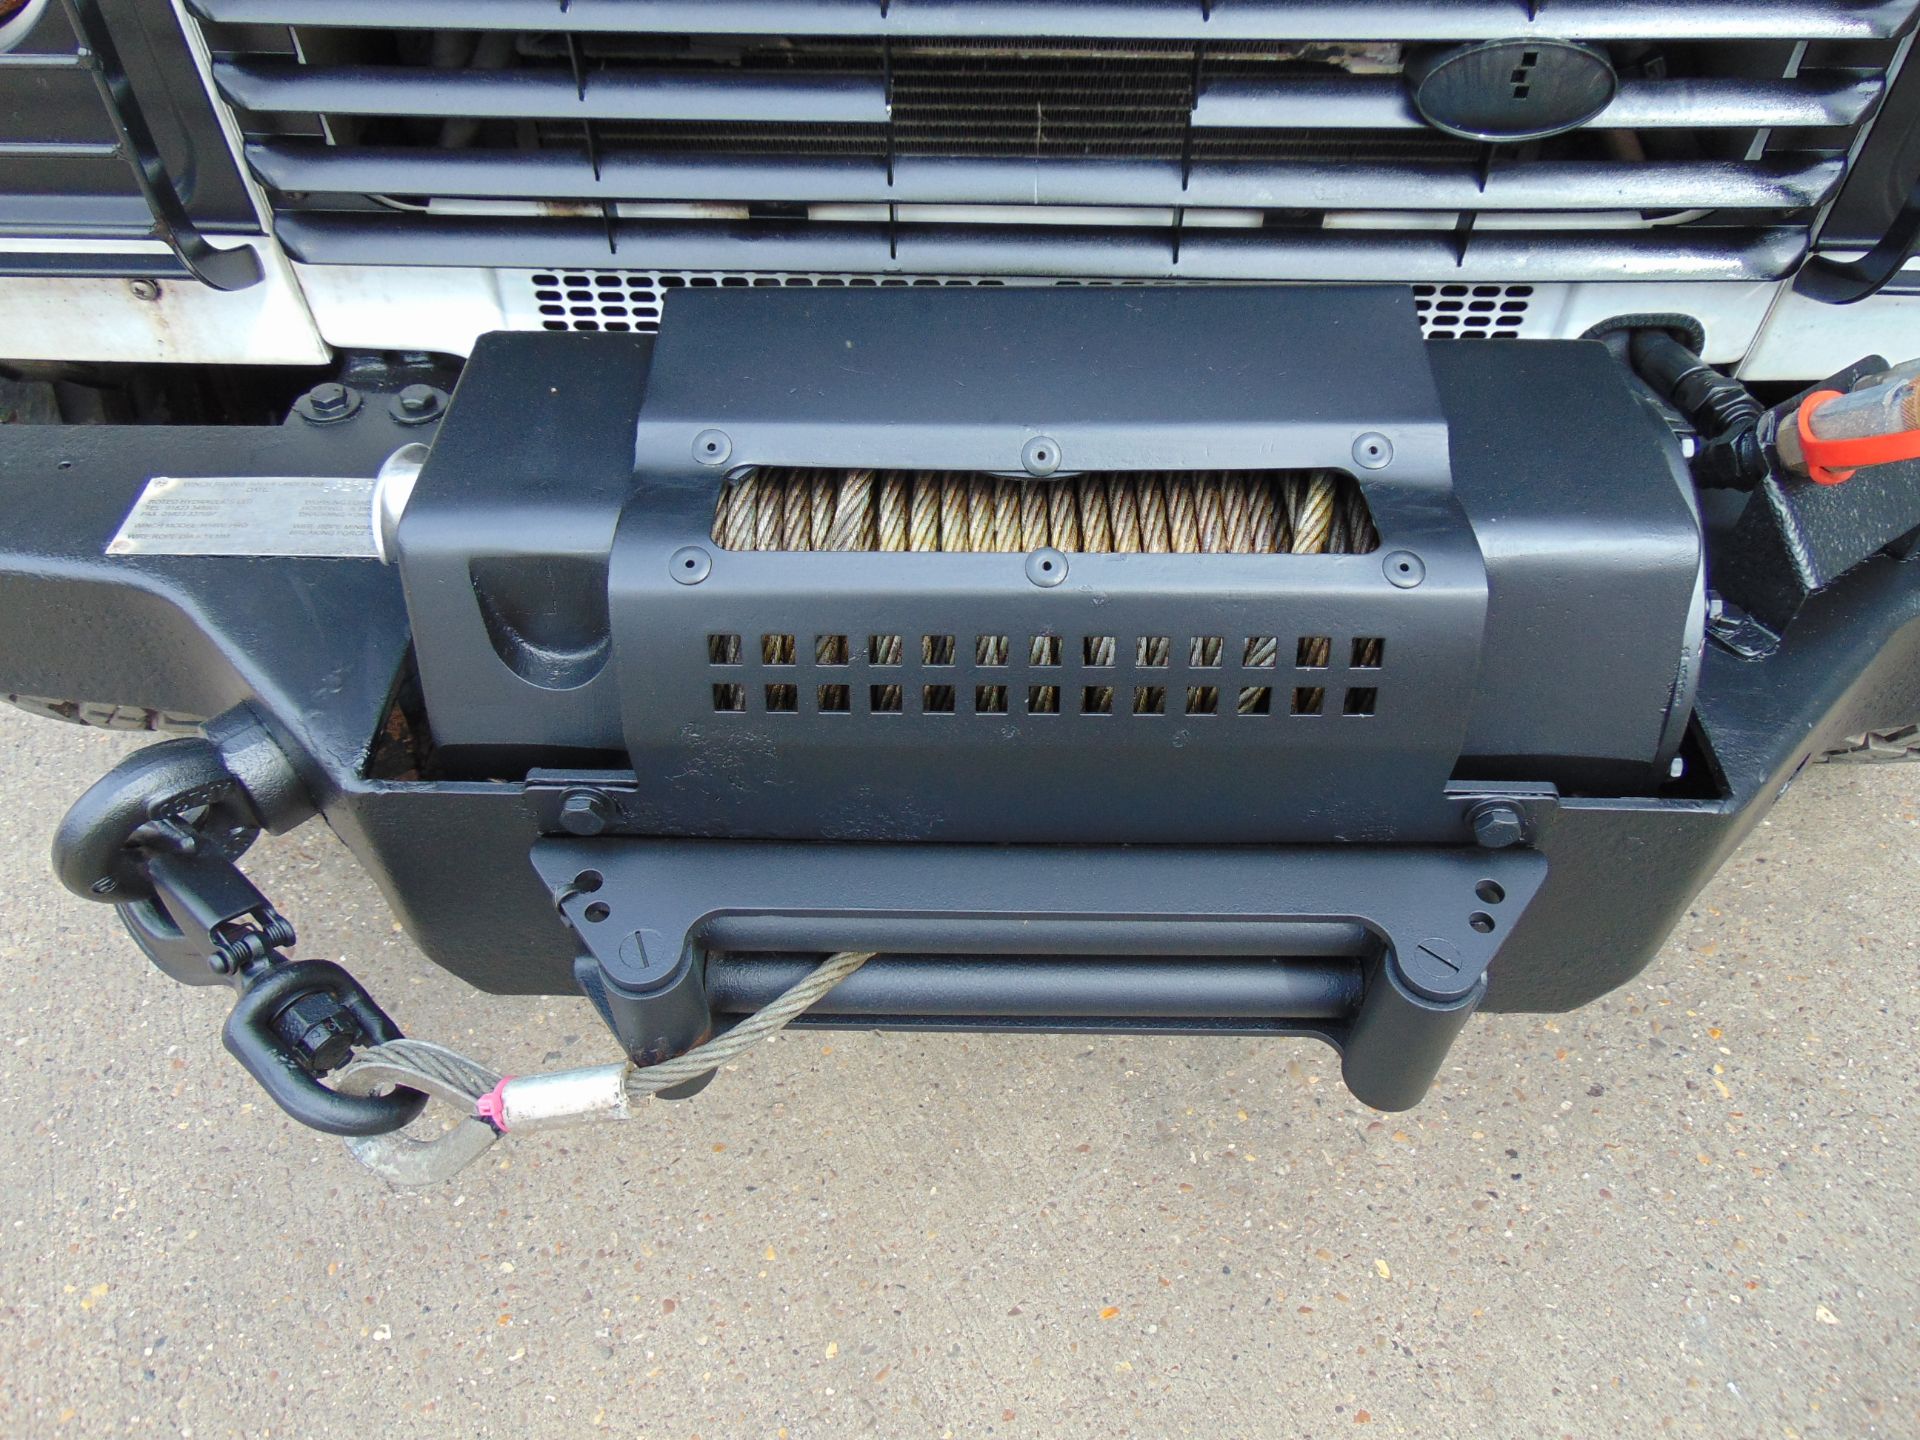 2013 Land Rover Defender 110 Puma hardtop 4x4 Utility vehicle (mobile workshop) with hydraulic winch - Image 24 of 44